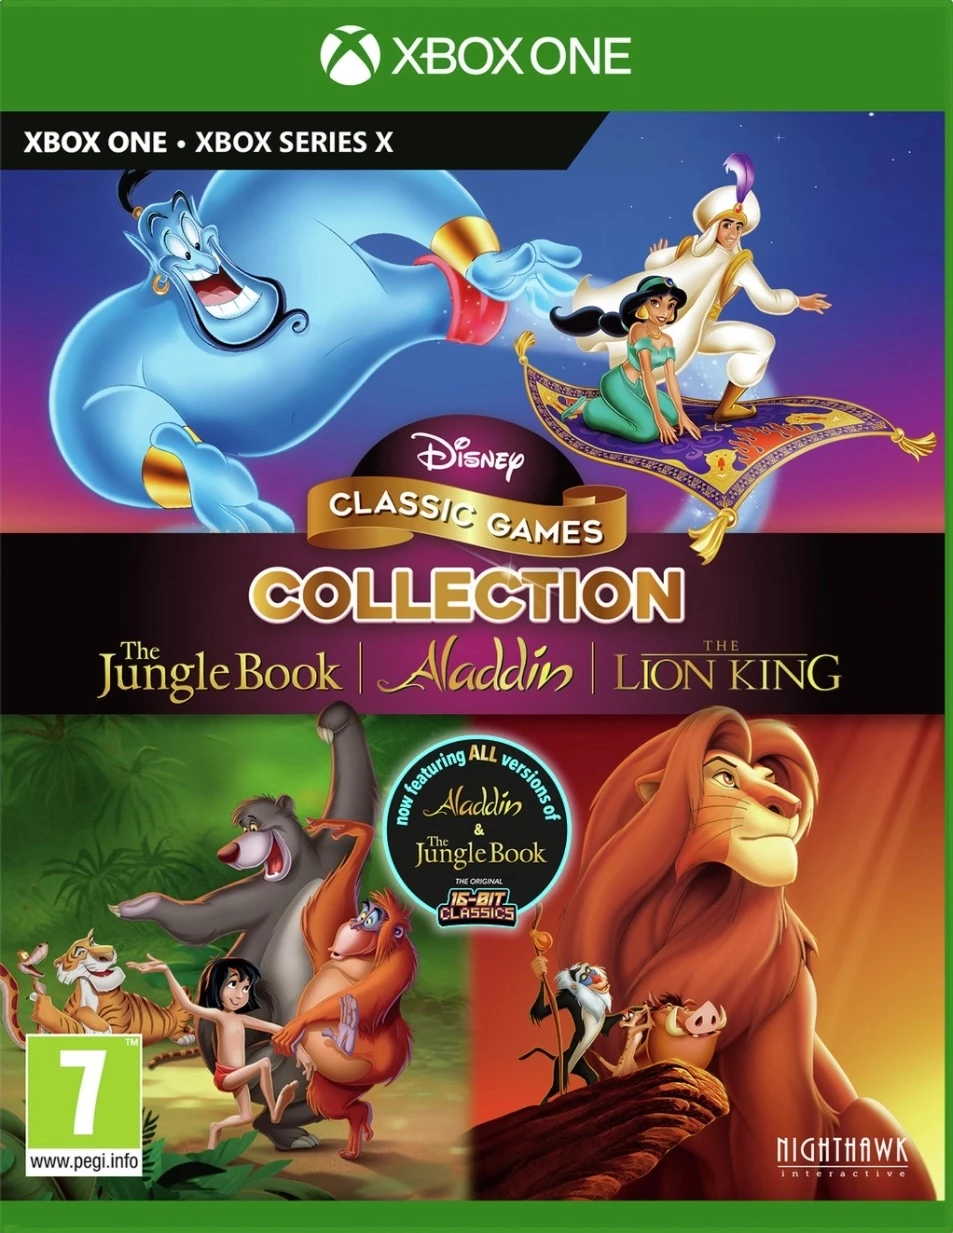 Disney Classic Games Collection: The Jungle Book, Aladdin and The Lion King (Xbox One), Nighthawk Interactive 